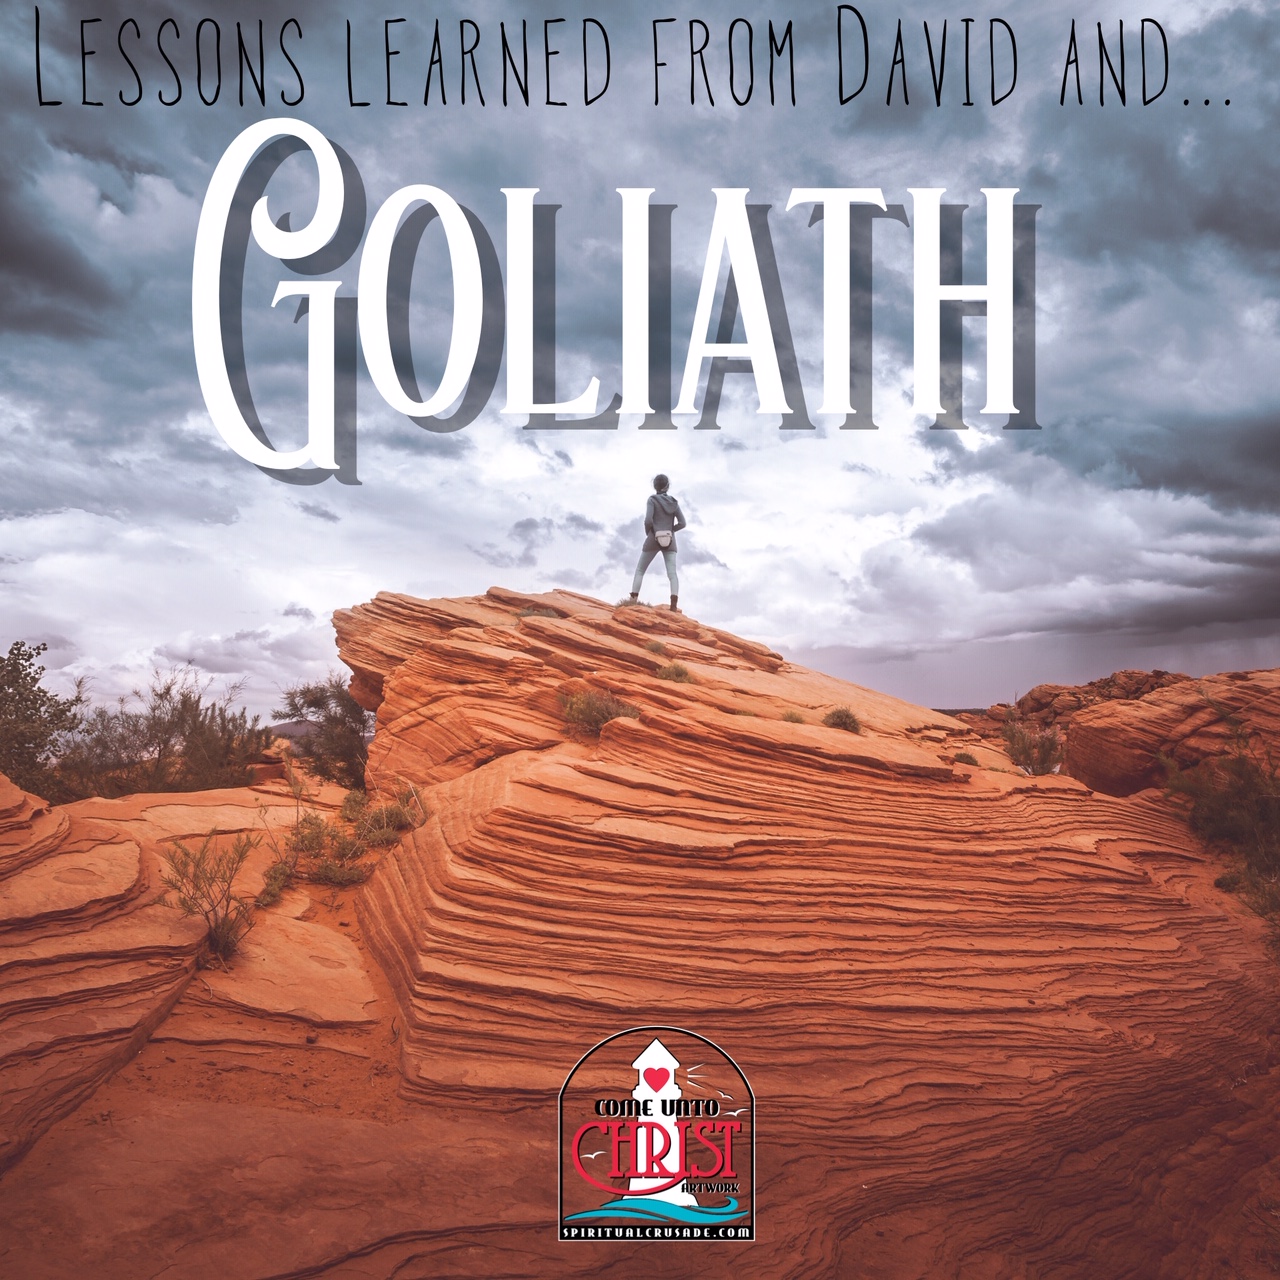 The Giants in Our Lives (David and Goliath): Applying the ...